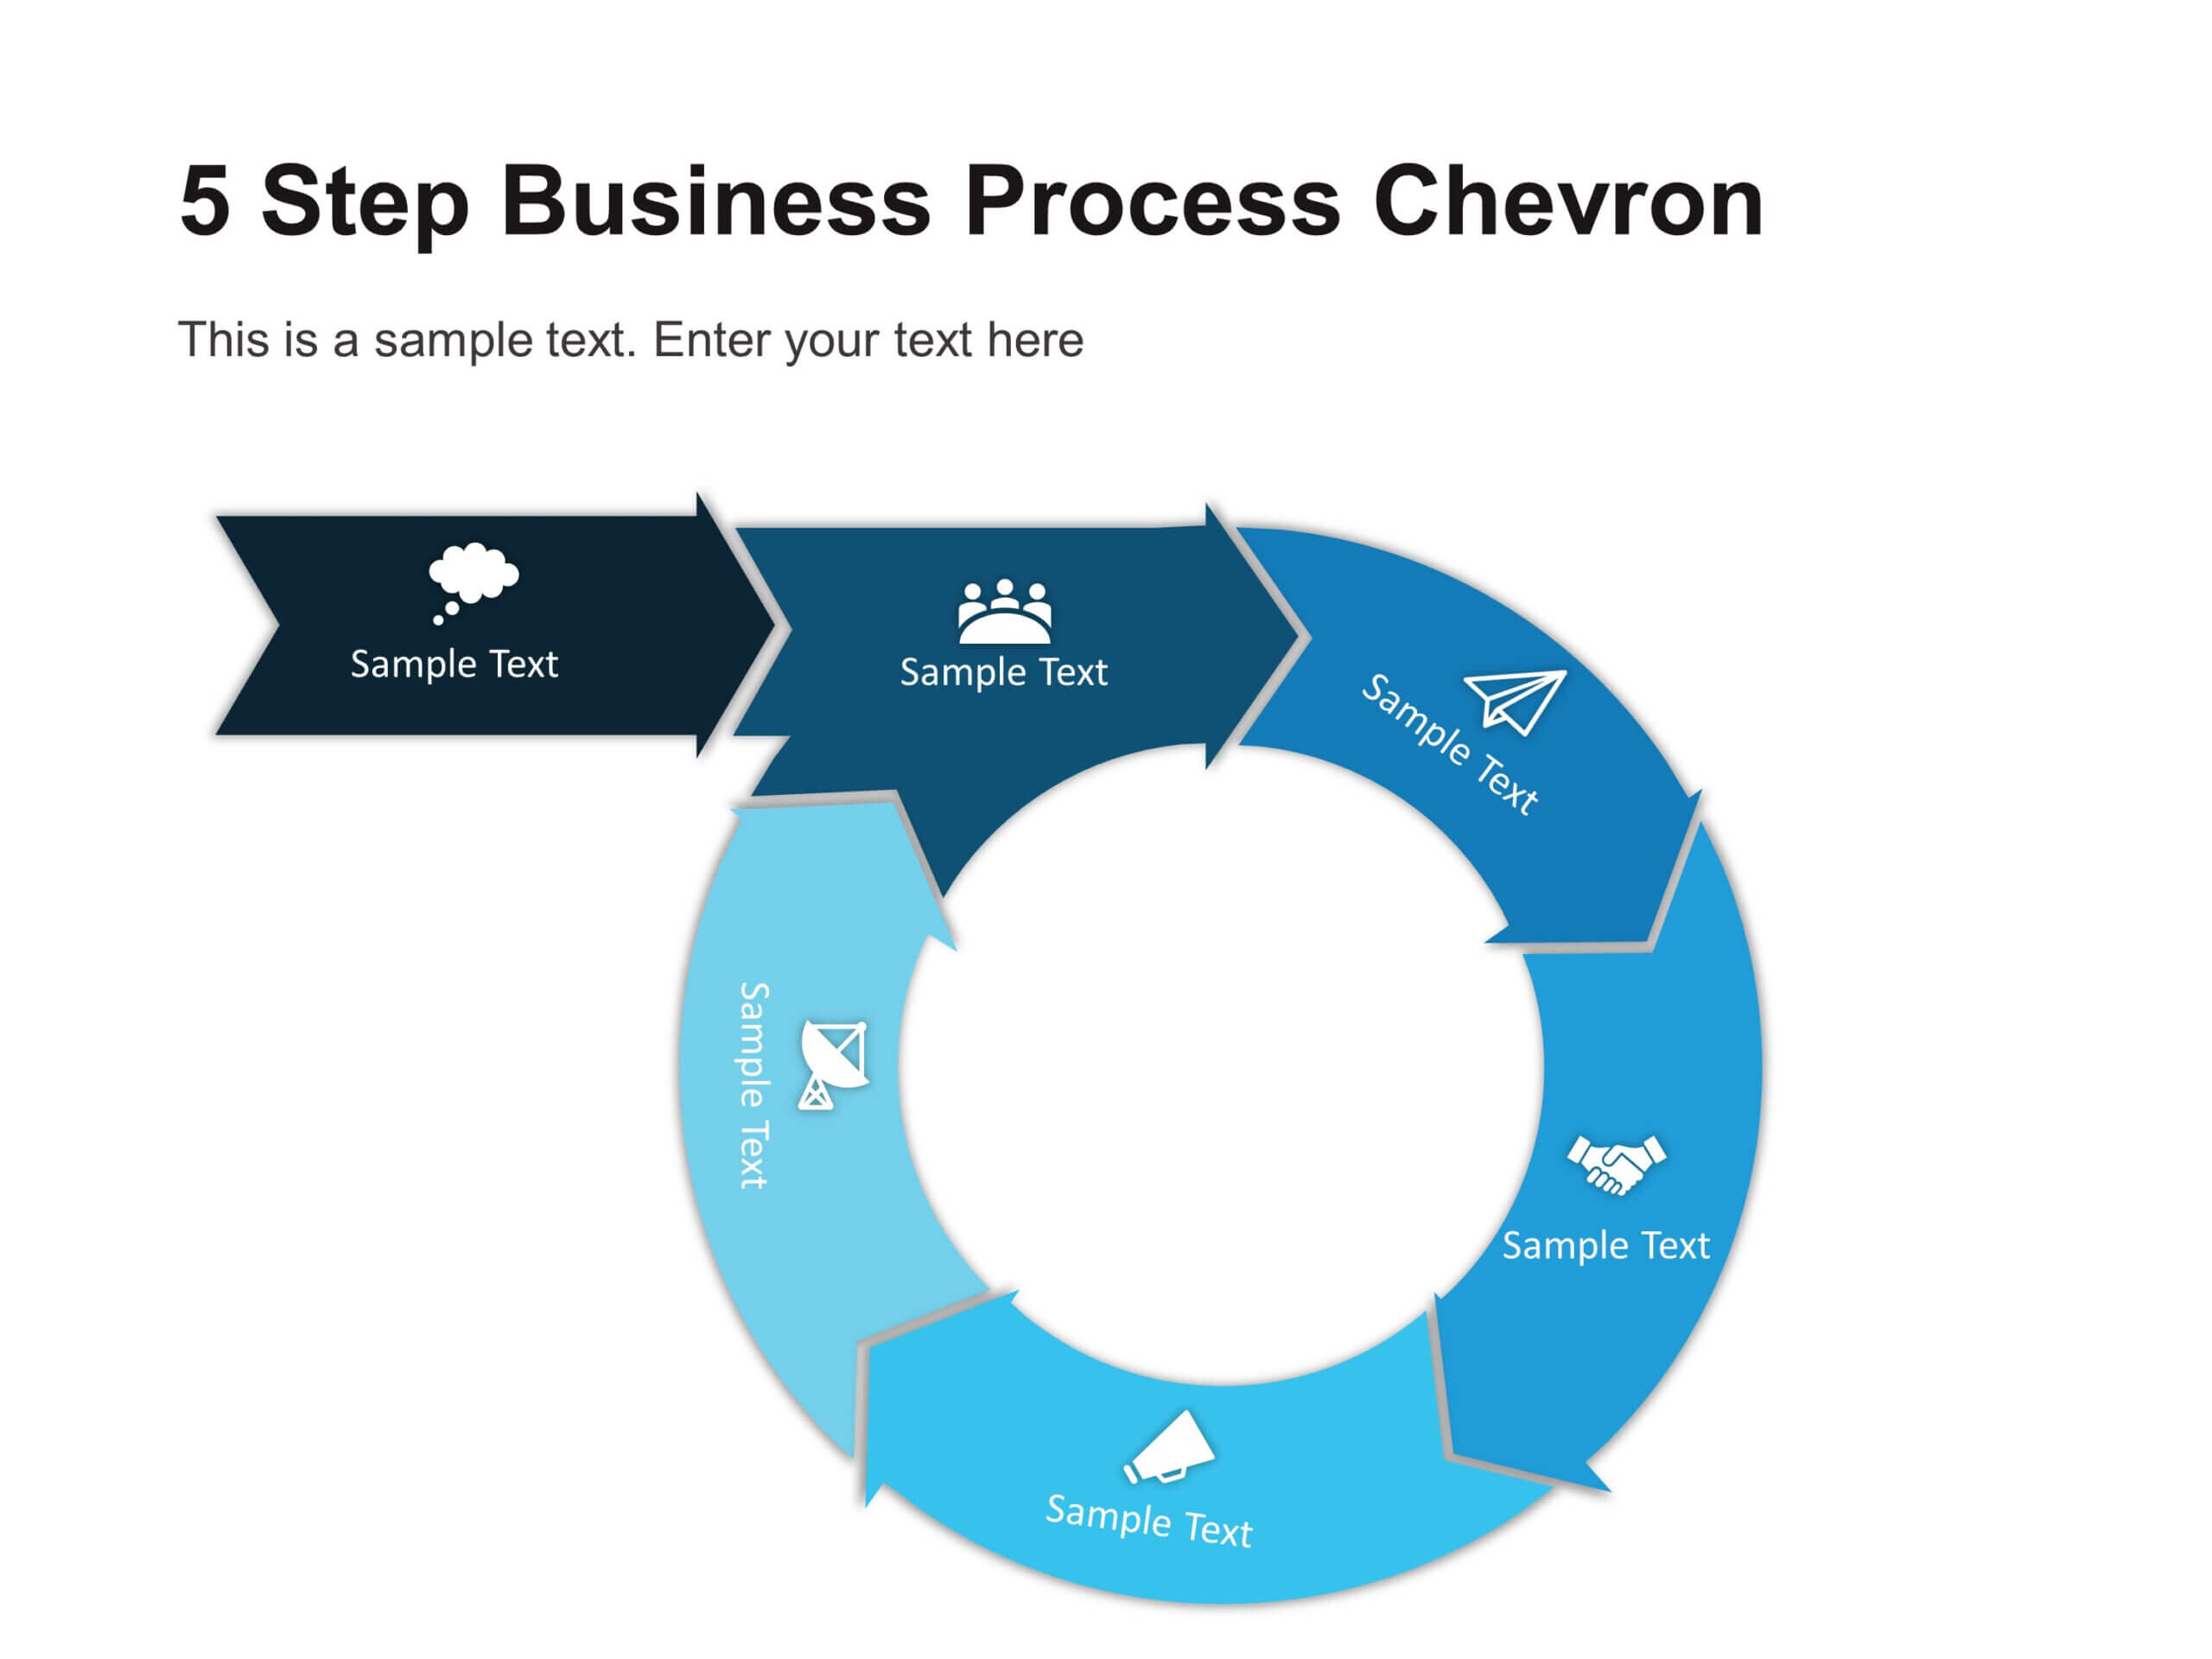 5 Step Business Process Chevron Diagram Template | Chevron Intended For Powerpoint Chevron Template